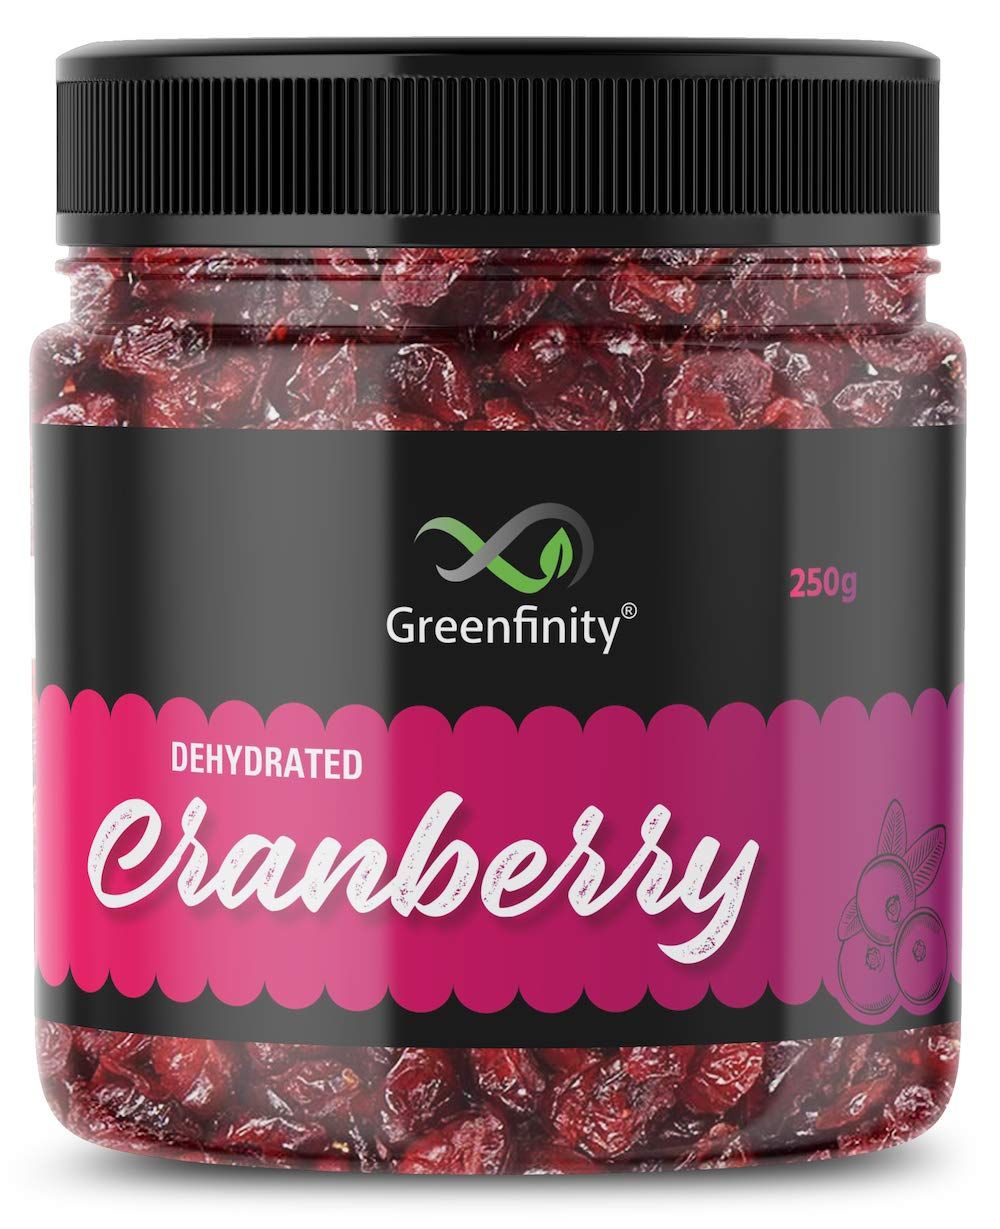 GreenFinity Cranberries Dried Sliced Image